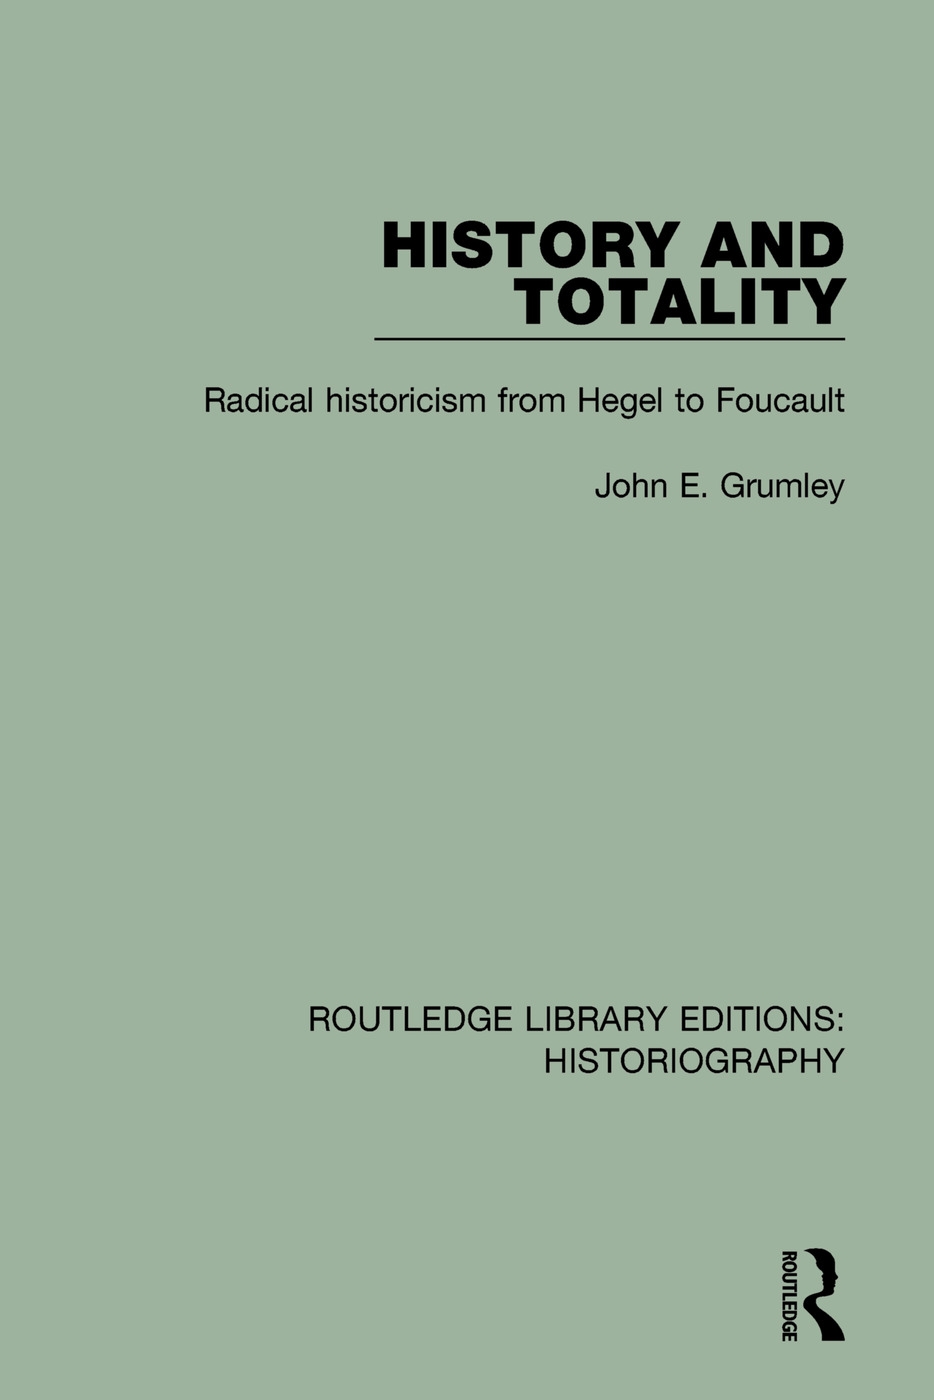 History and Totality: Radical Historicism from Hegel to Foucault